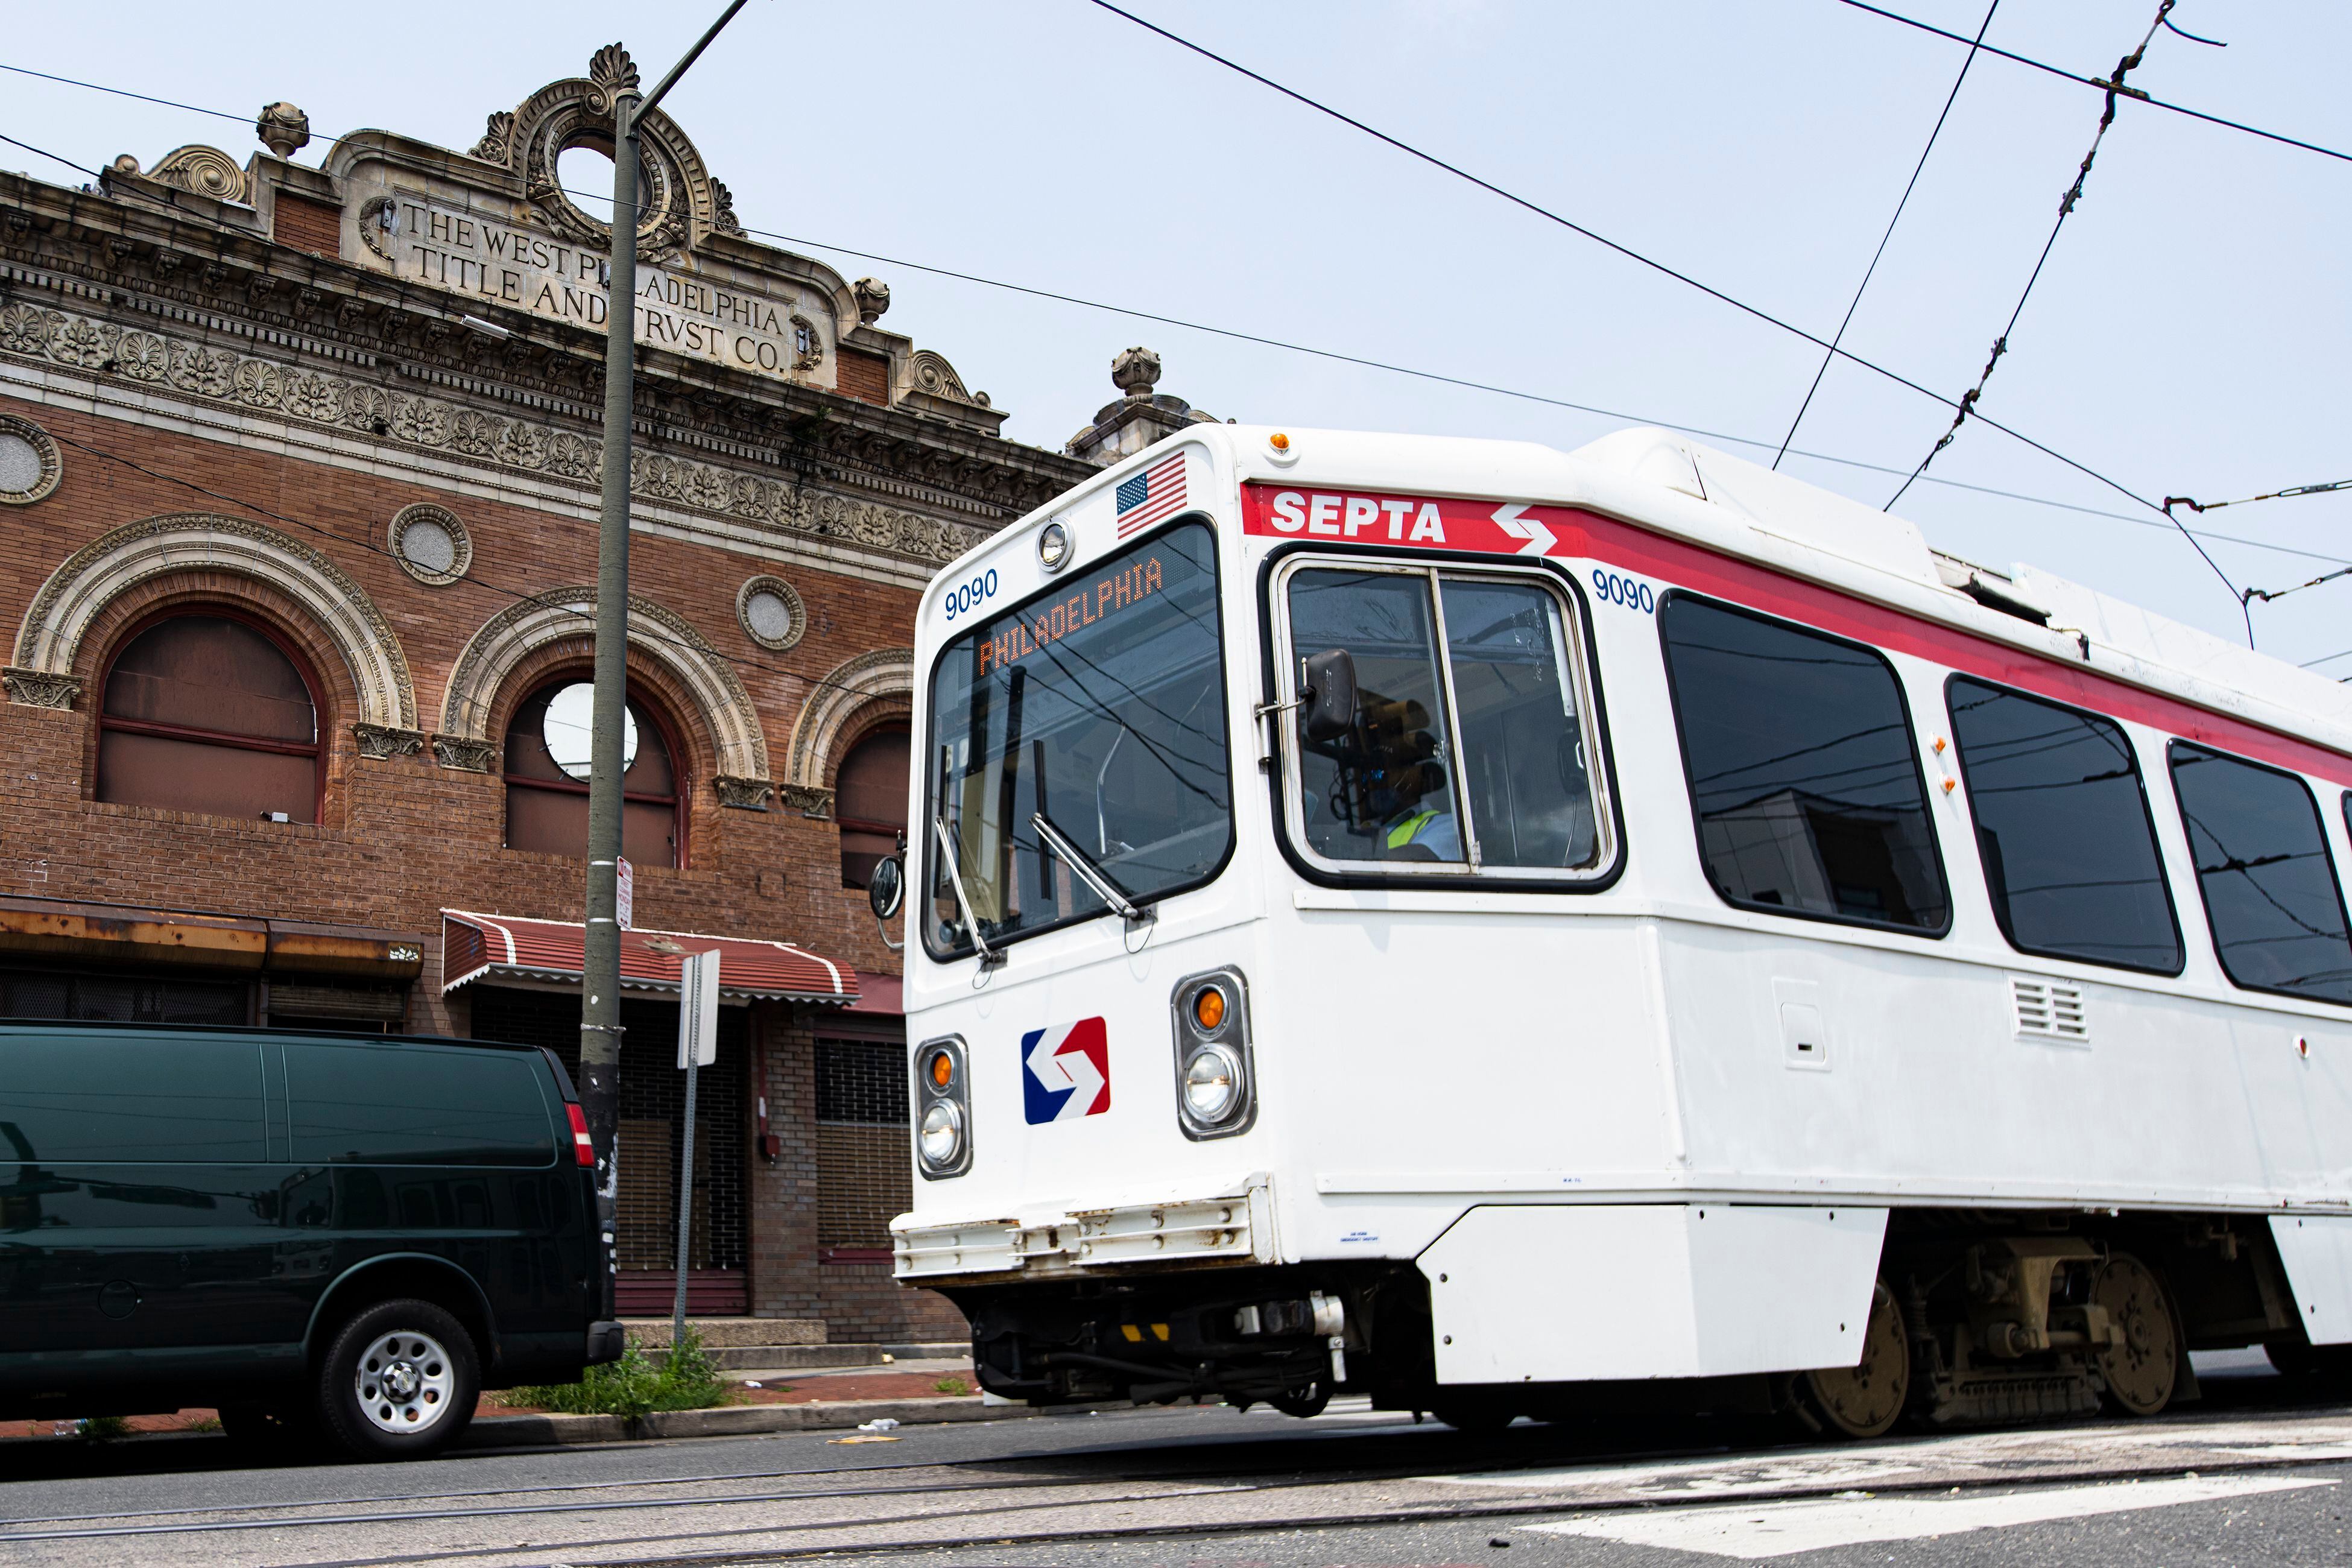 why the broad street line is so slow between walnut-locust and lombard-south